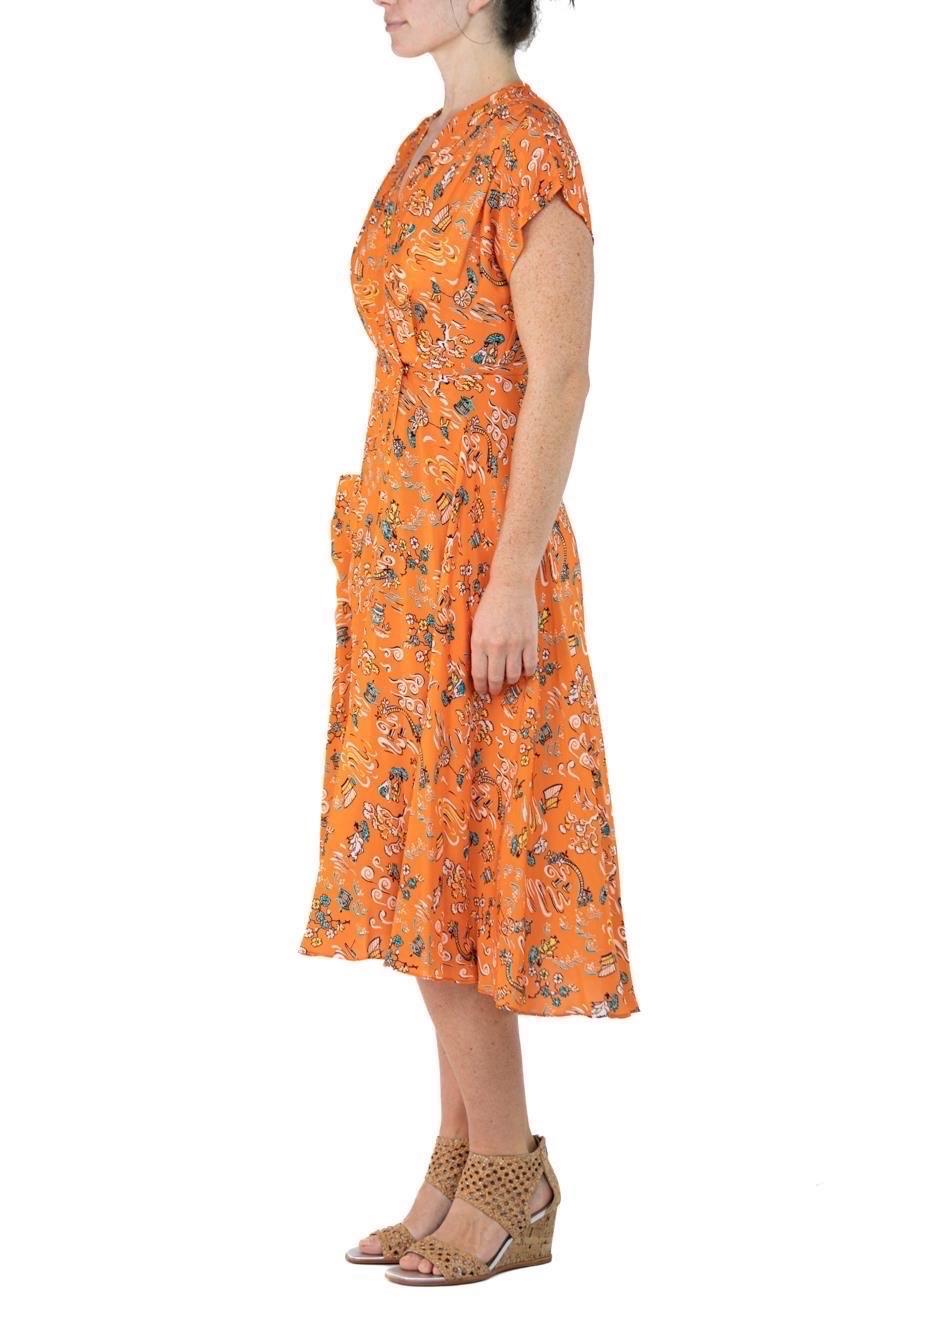 Morphew Collection Orange Cherry Blossom Novelty Print Cold Rayon Bias Dress Ma For Sale 2